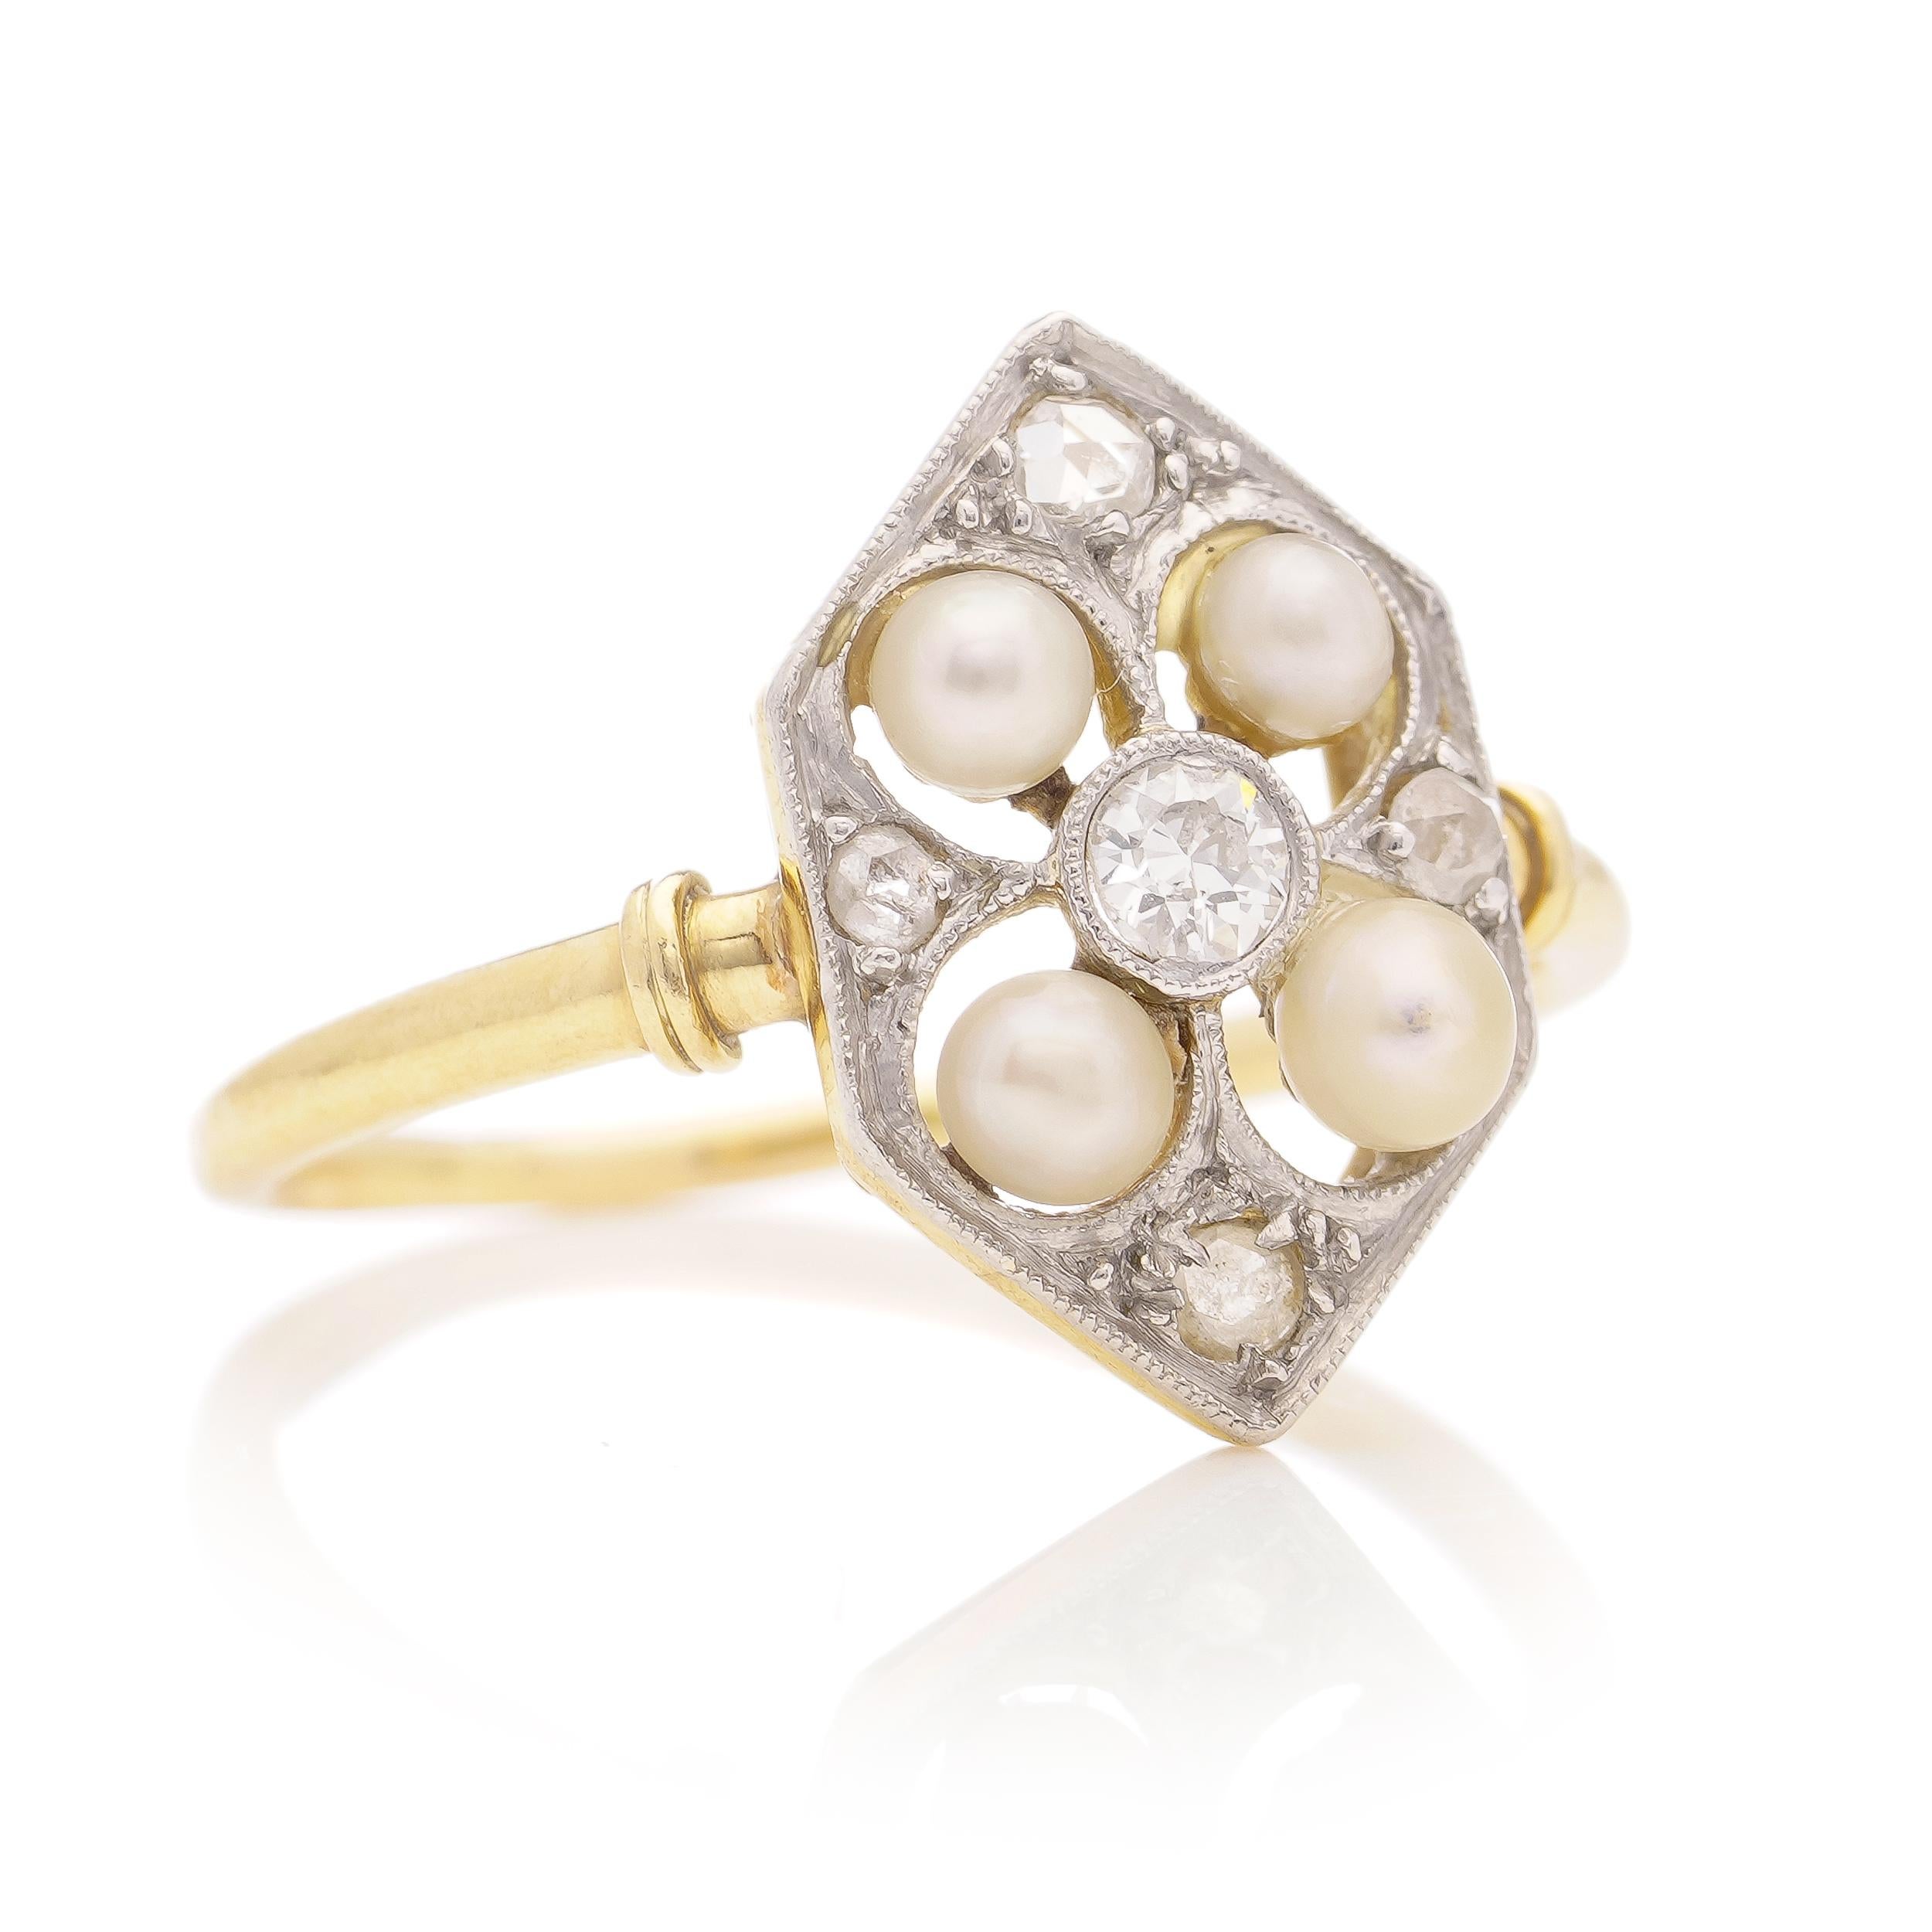 Edwardian 18kt yellow gold and platinum ladies' ring with diamonds and pearls  For Sale 2